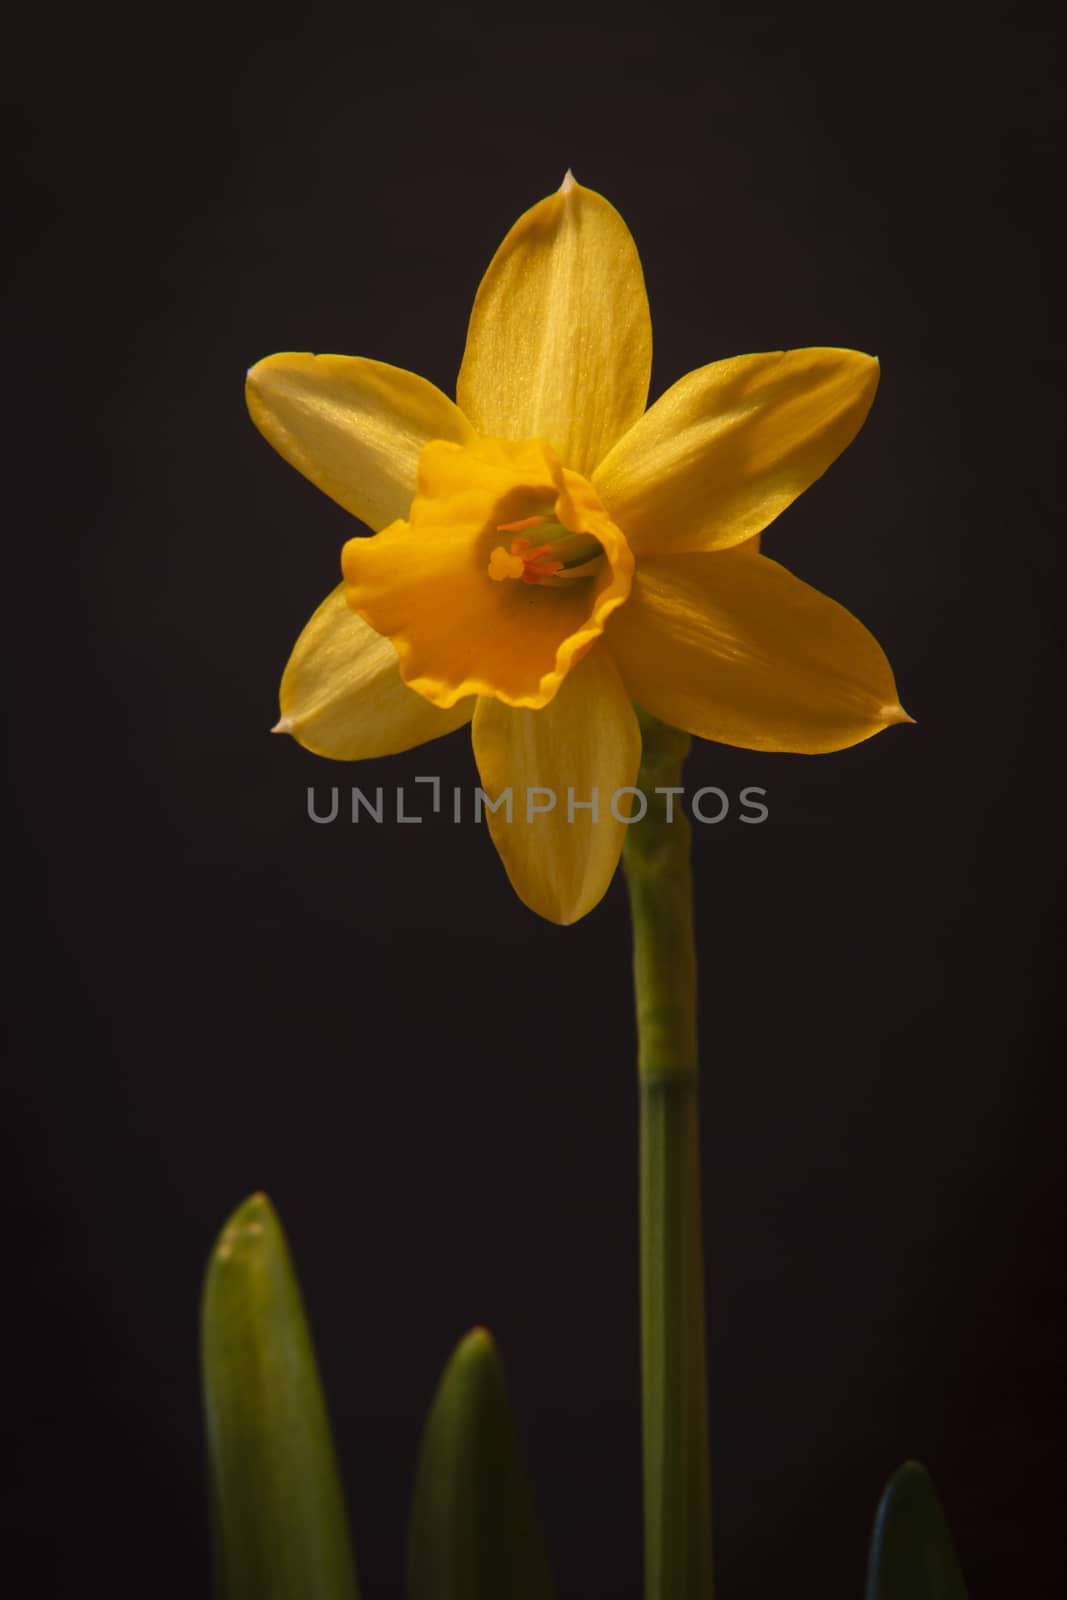 Yellow narcissi isolated on a black background.